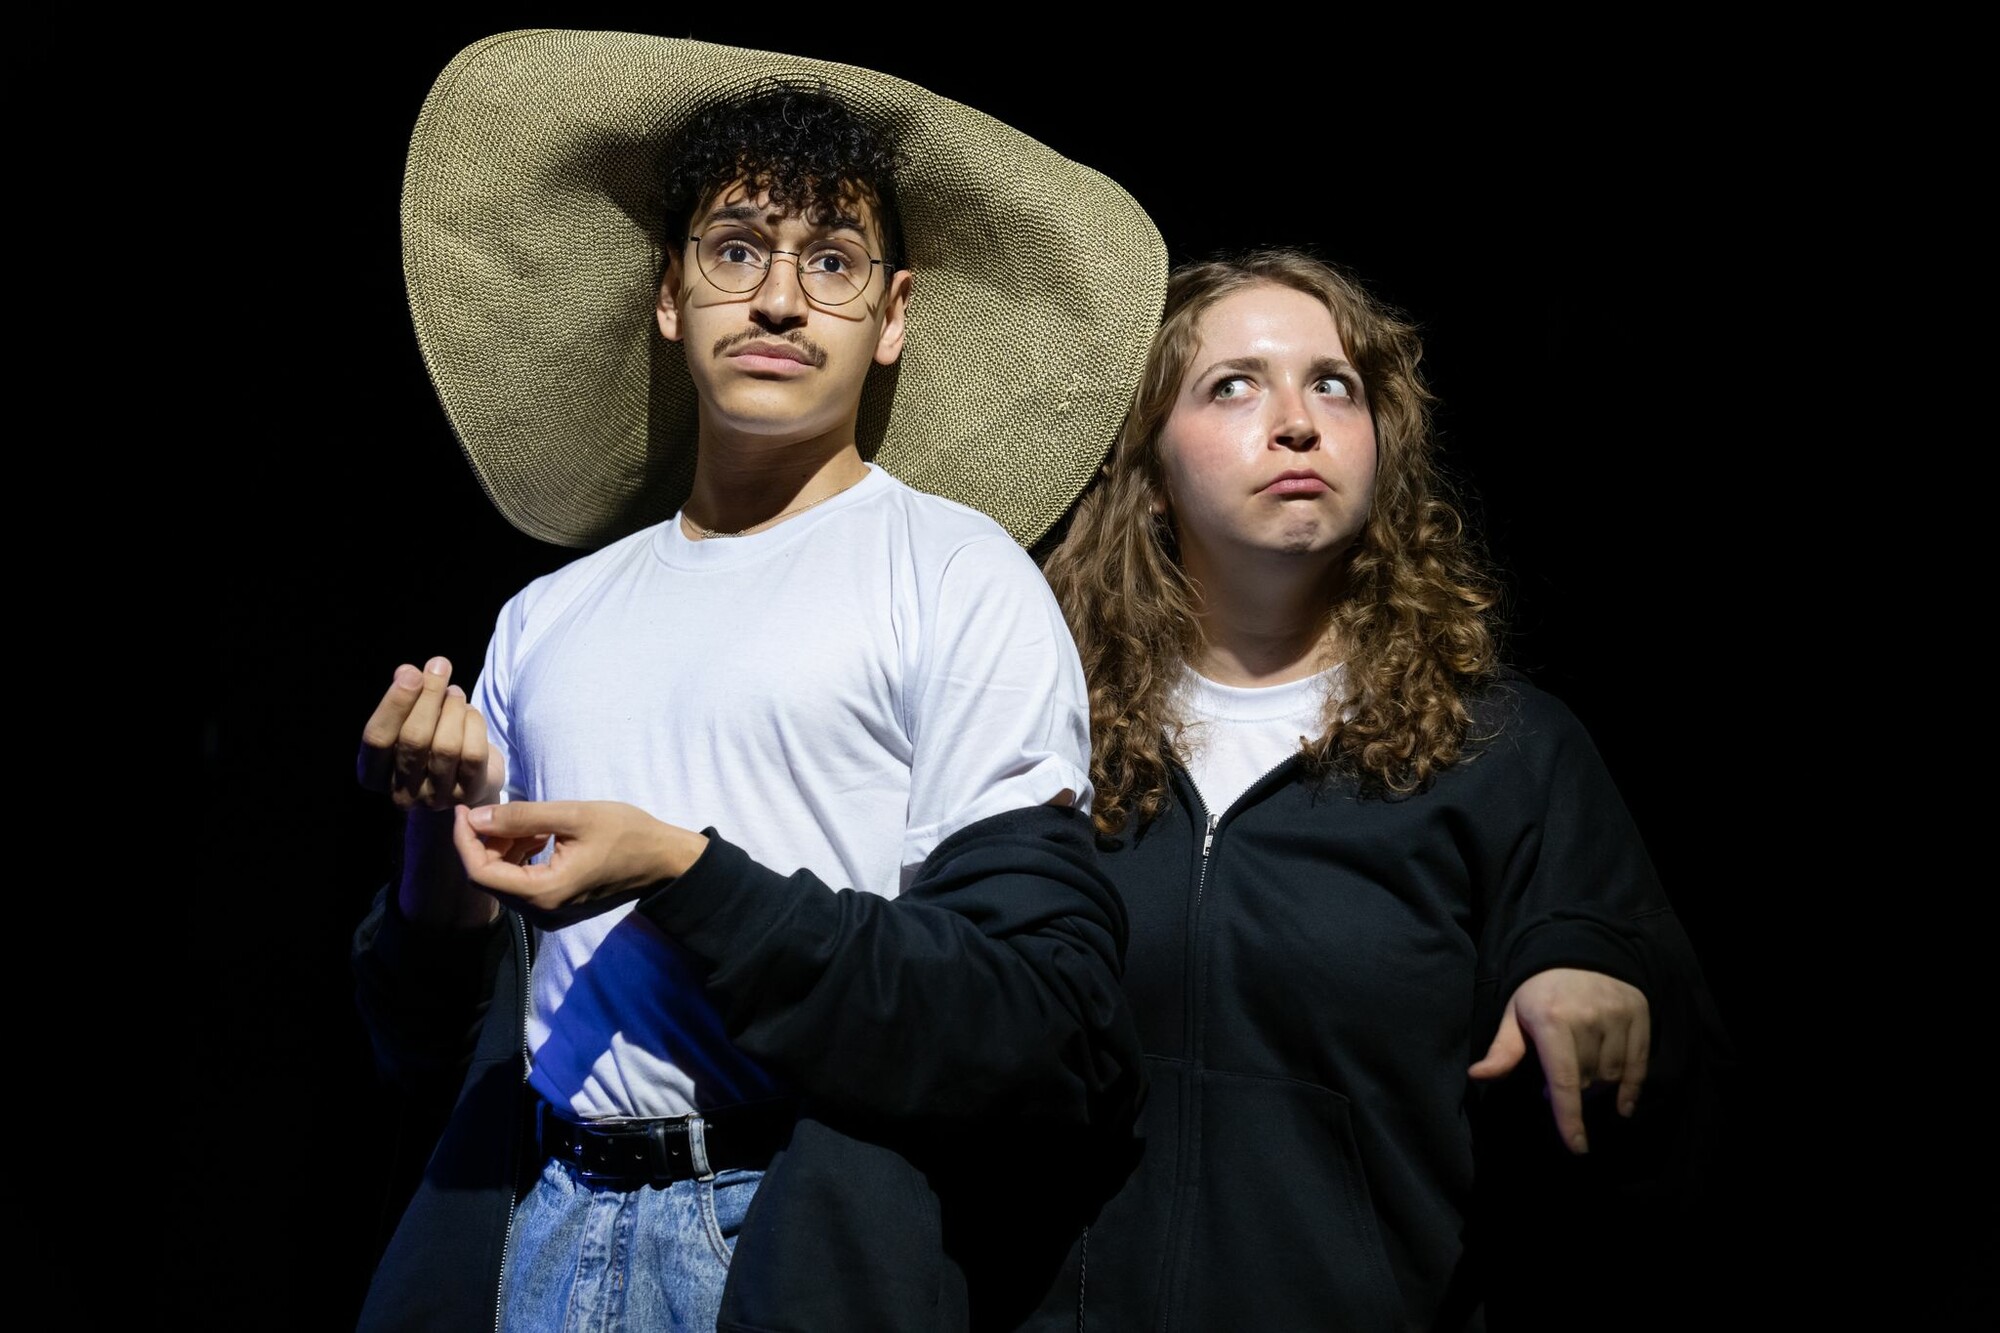 A performer in a large-brimmed floppy straw hat and a performer with a black zip-up hoodie stand onstage with quizzical facial expressions.